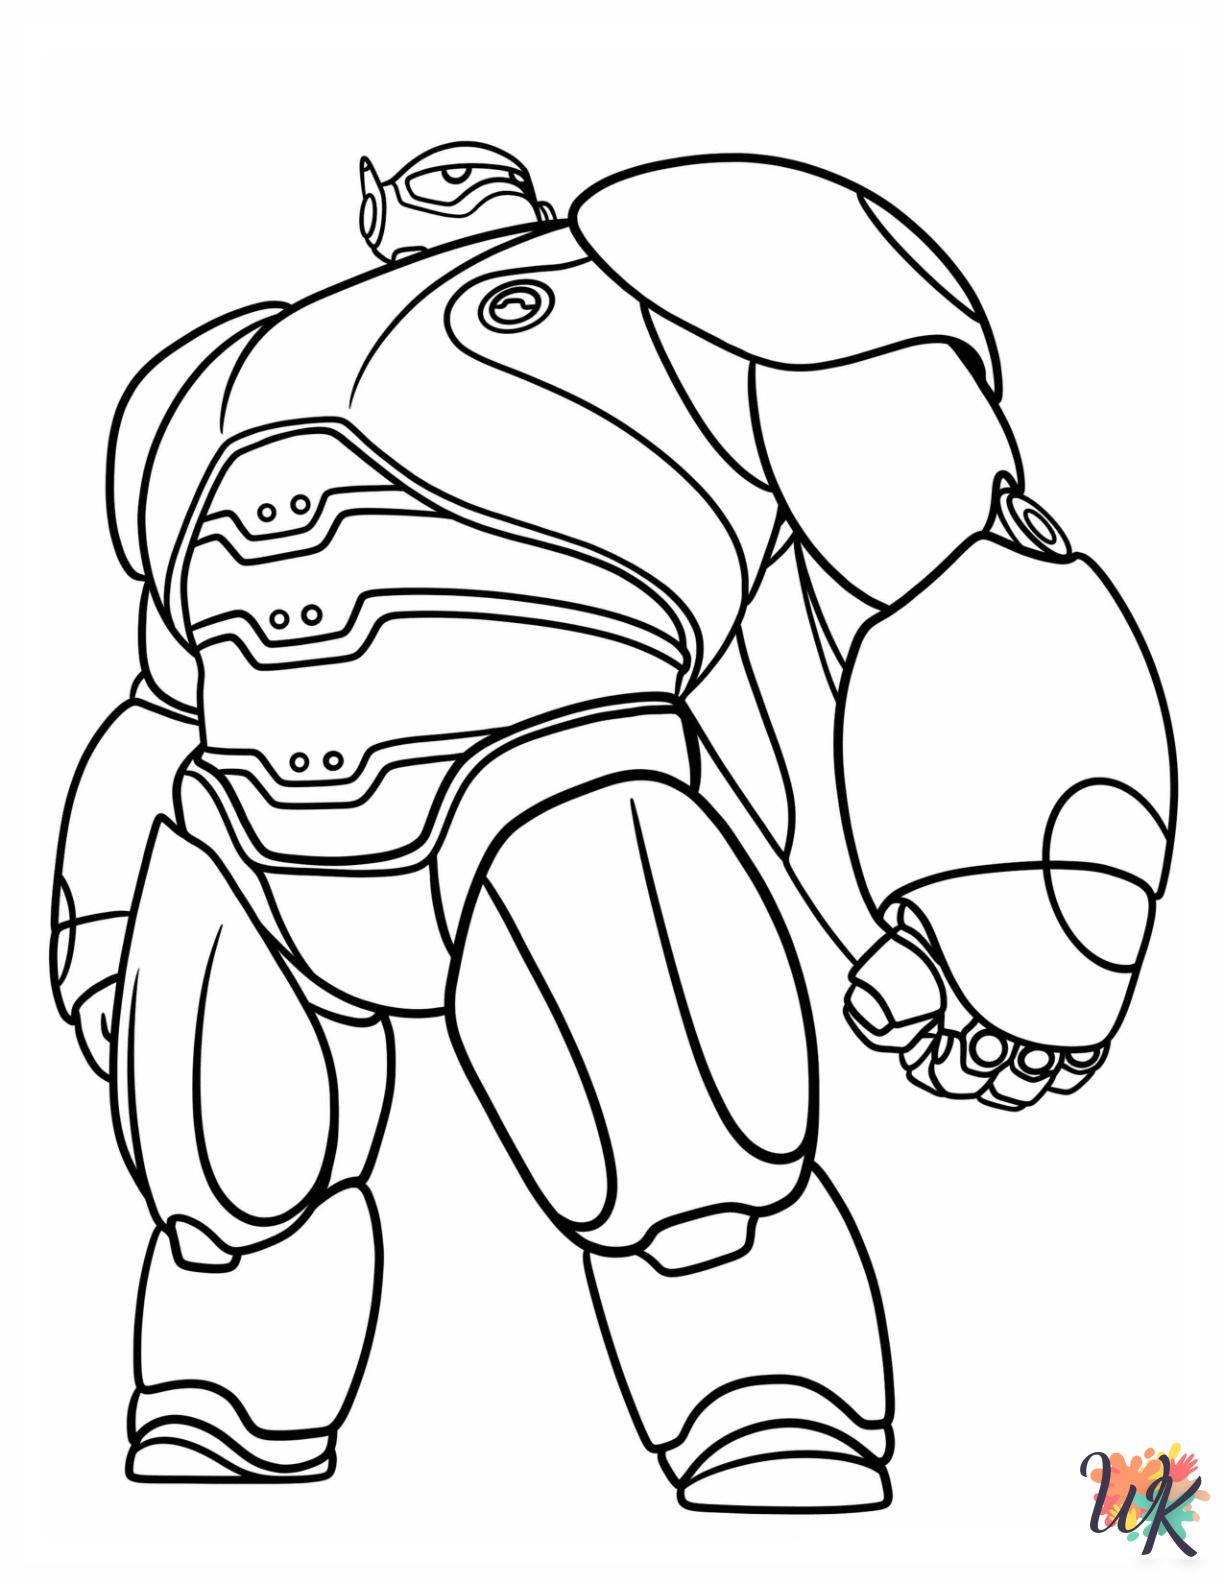 Big Hero 6 Coloring Pages 3